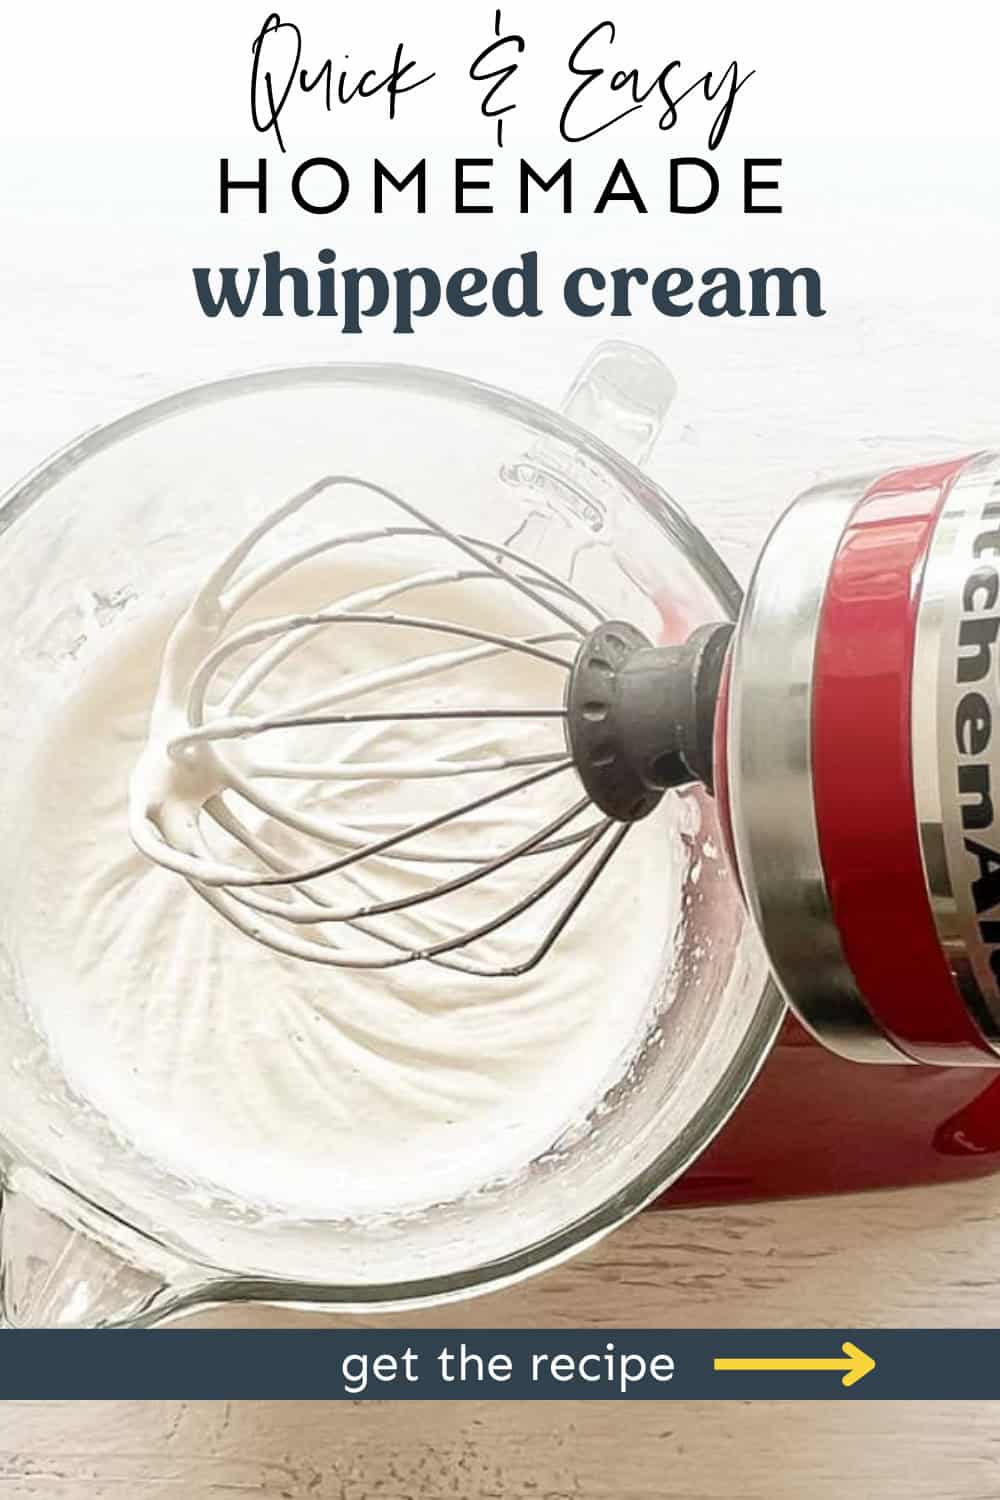 Red Kitchenaid mixer with homemade whipped cream on the whisk attachment and in the mixing bowl.